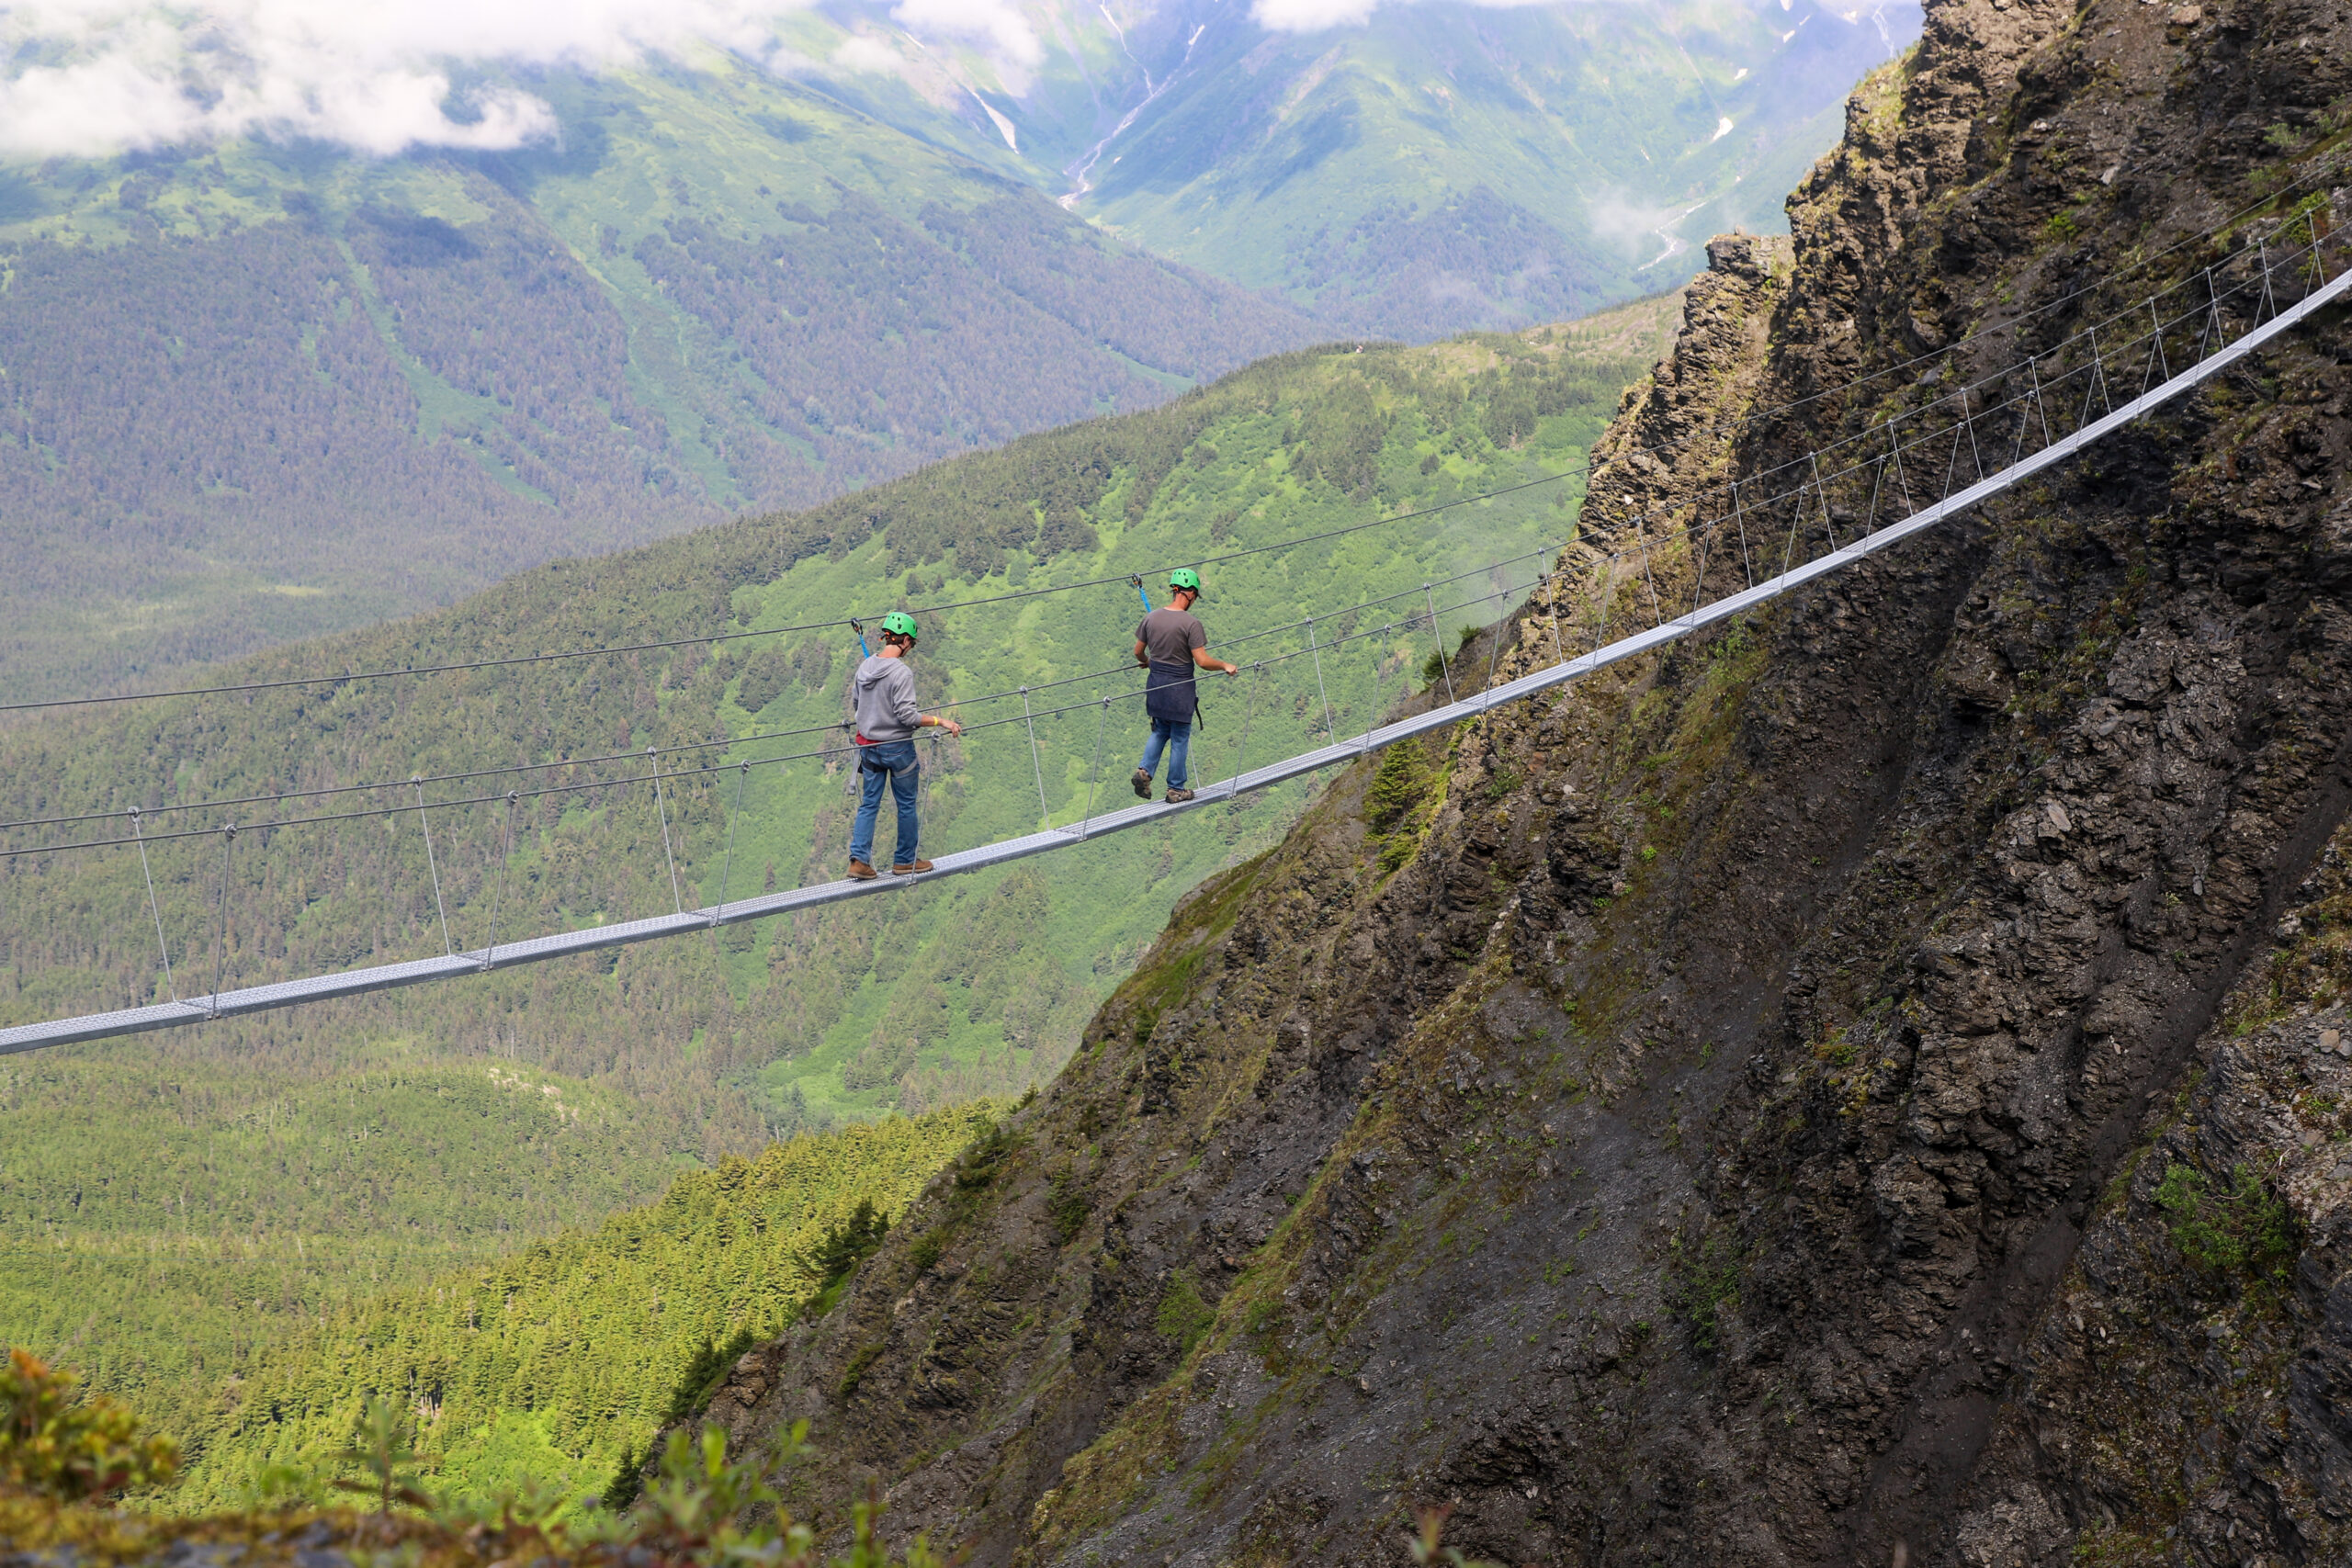 two people on a narrow bridge above a mountainside